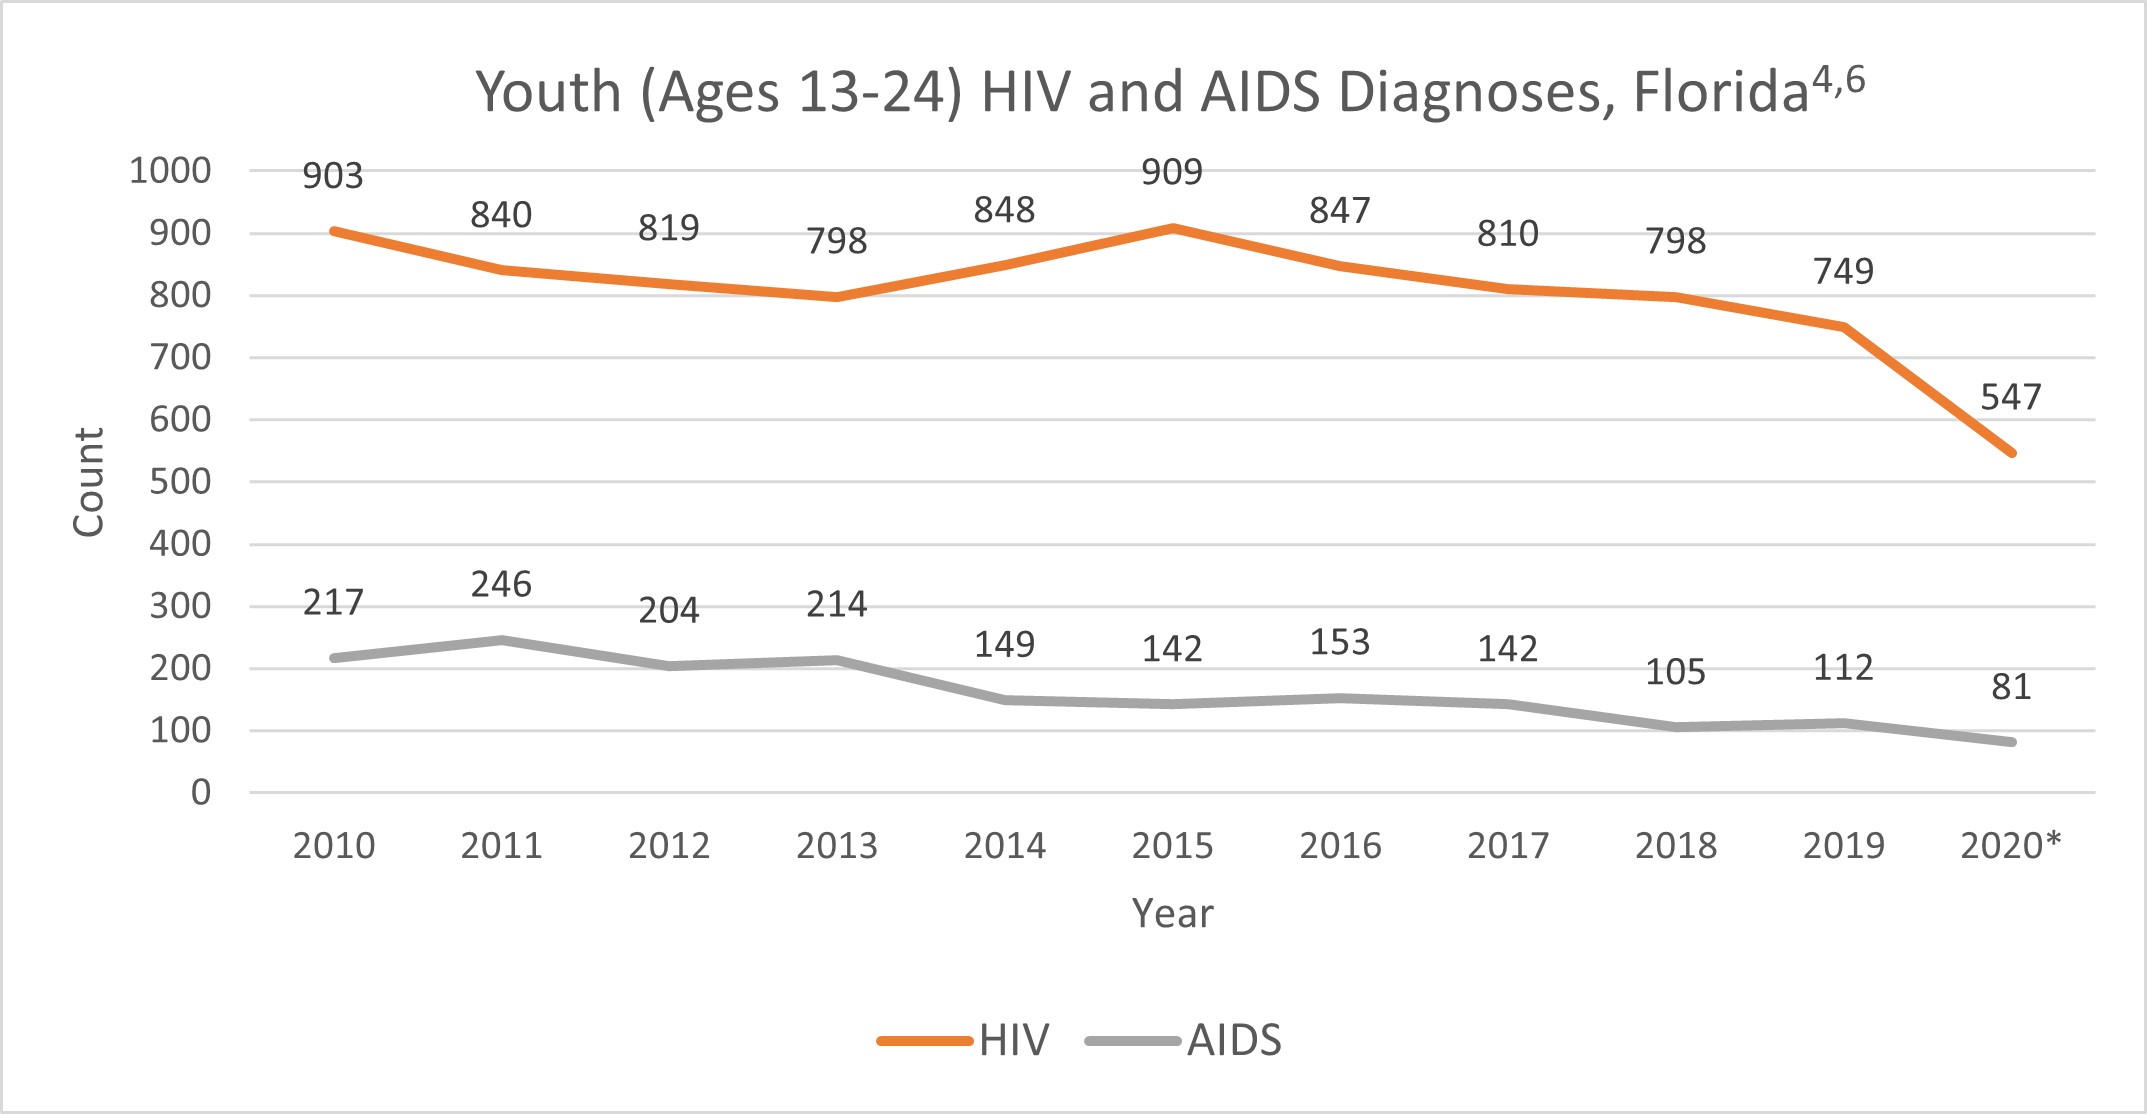 Youth (Ages 13-24) HIV and AIDS Diagnoses, Florida